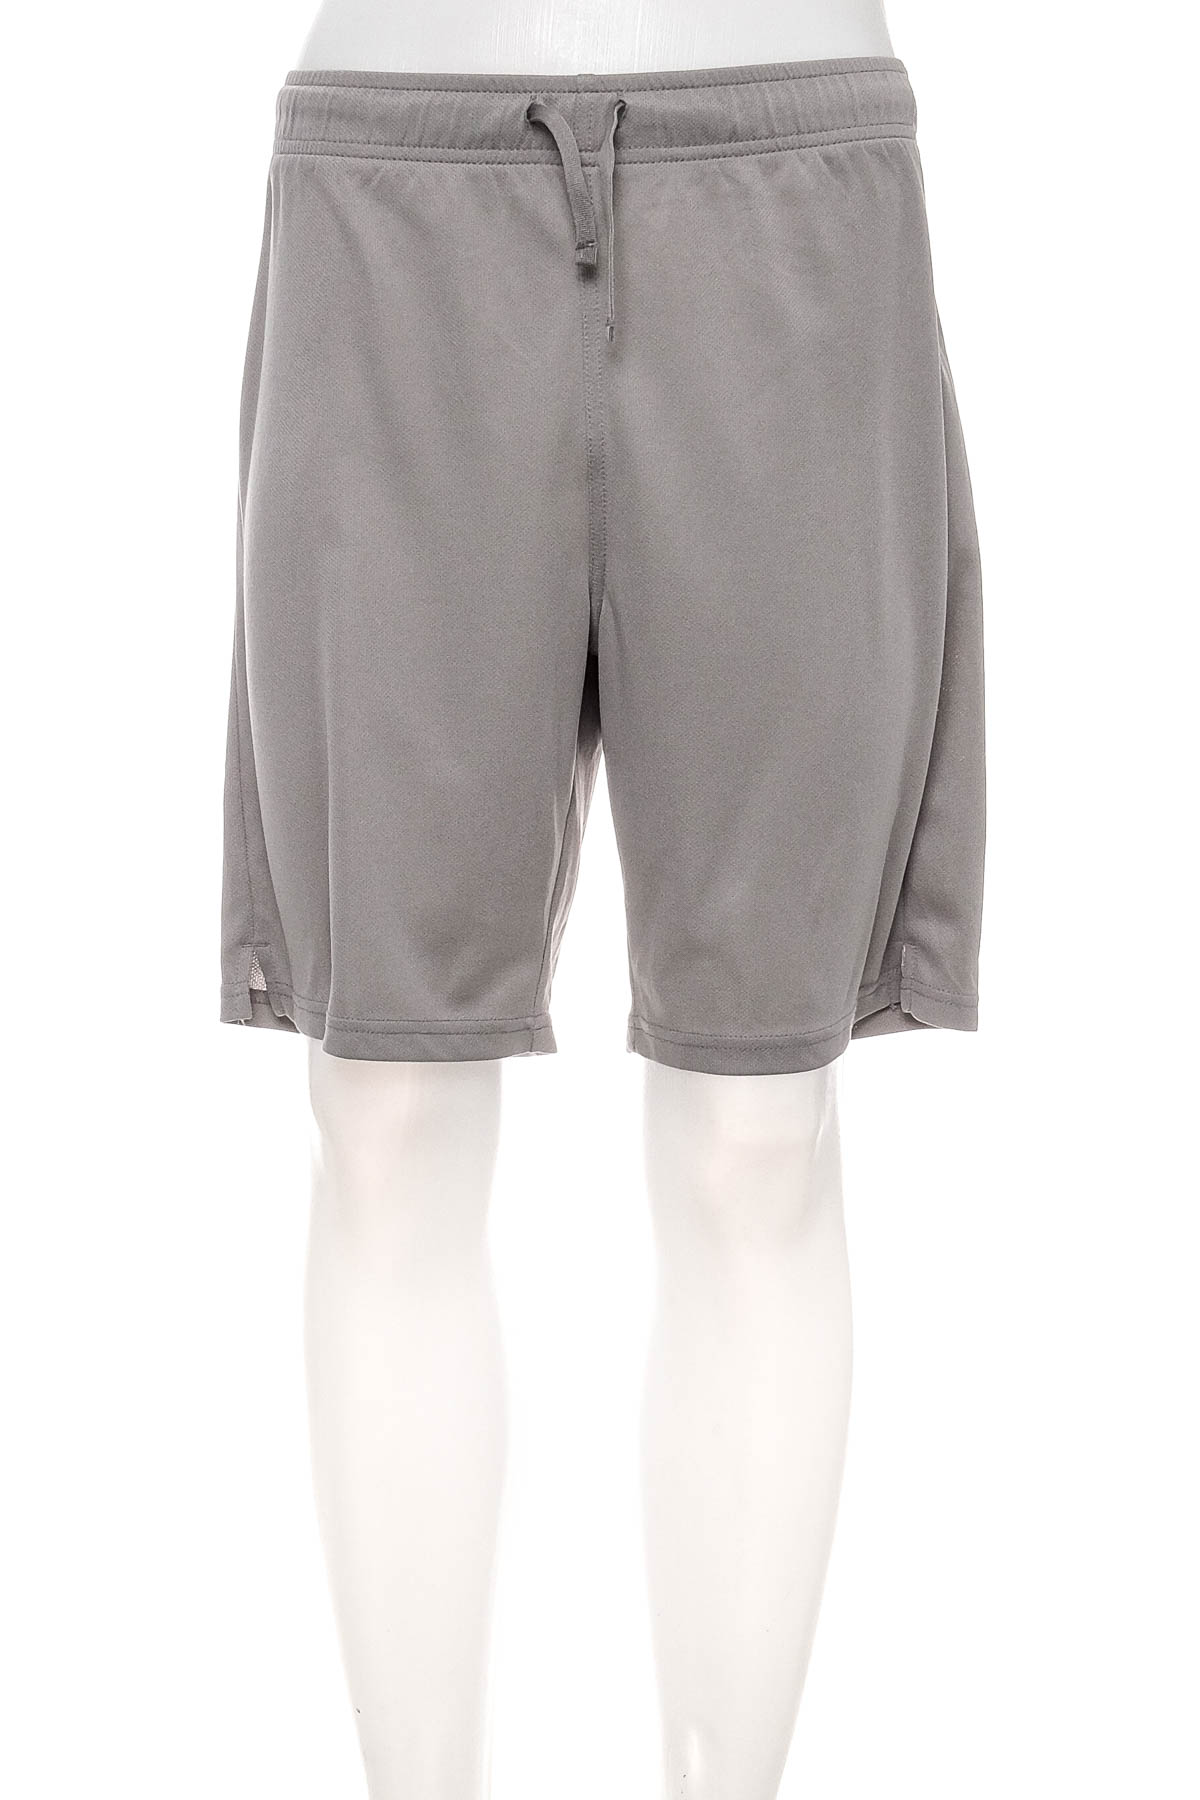 Shorts for boys - H&M Sport - 0